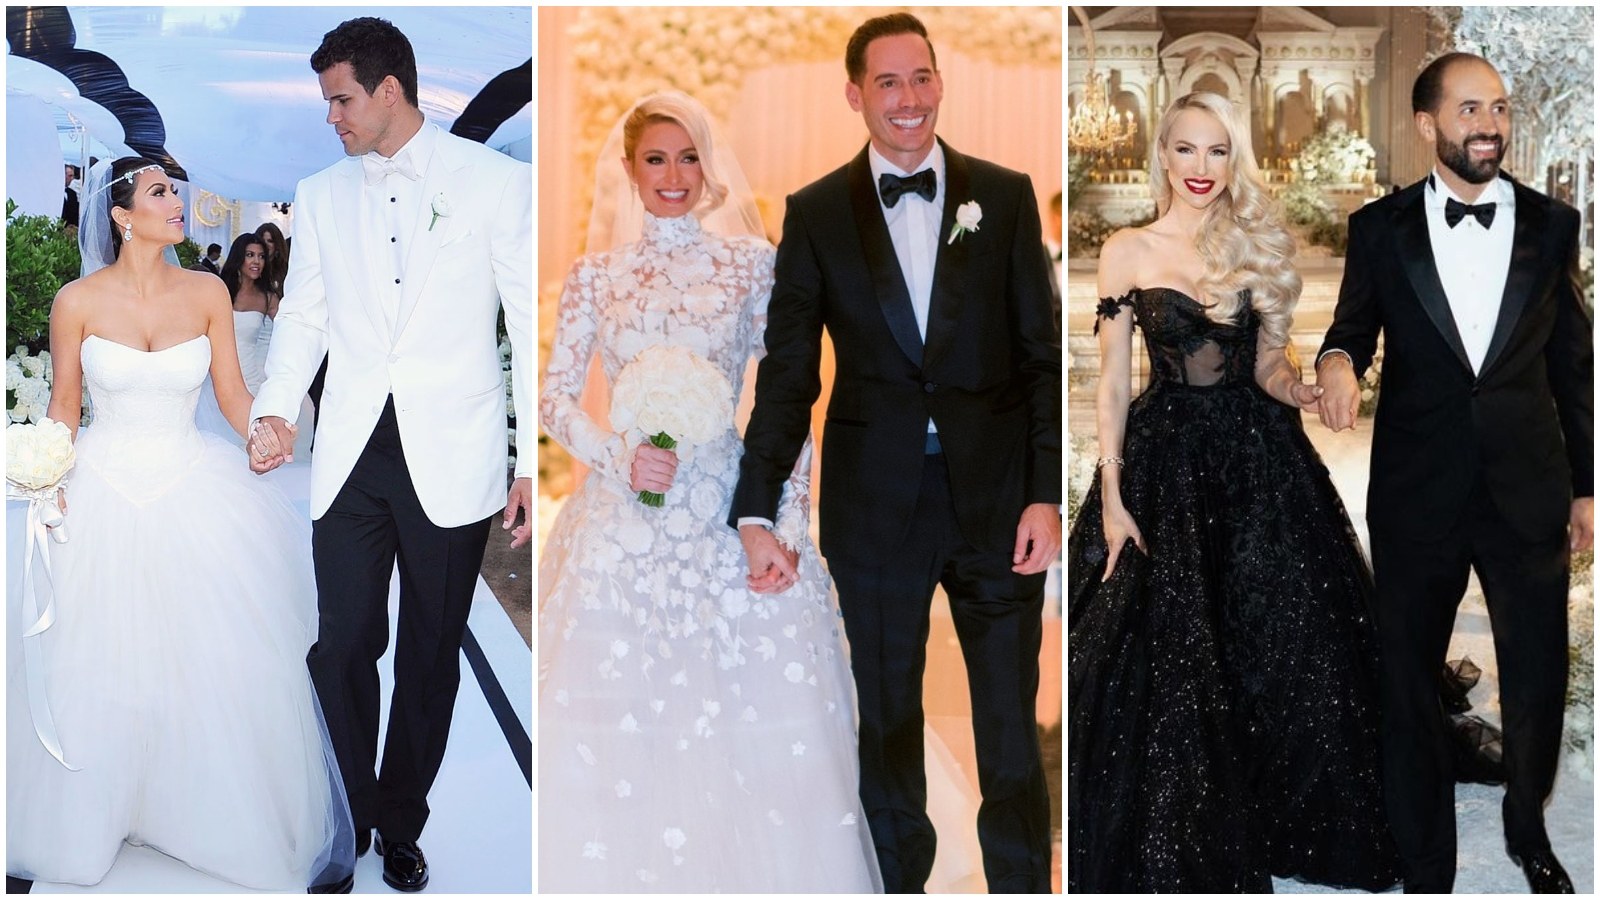 The 10 Most Expensive Wedding Dresses Of All Time - Wedded Wonderland